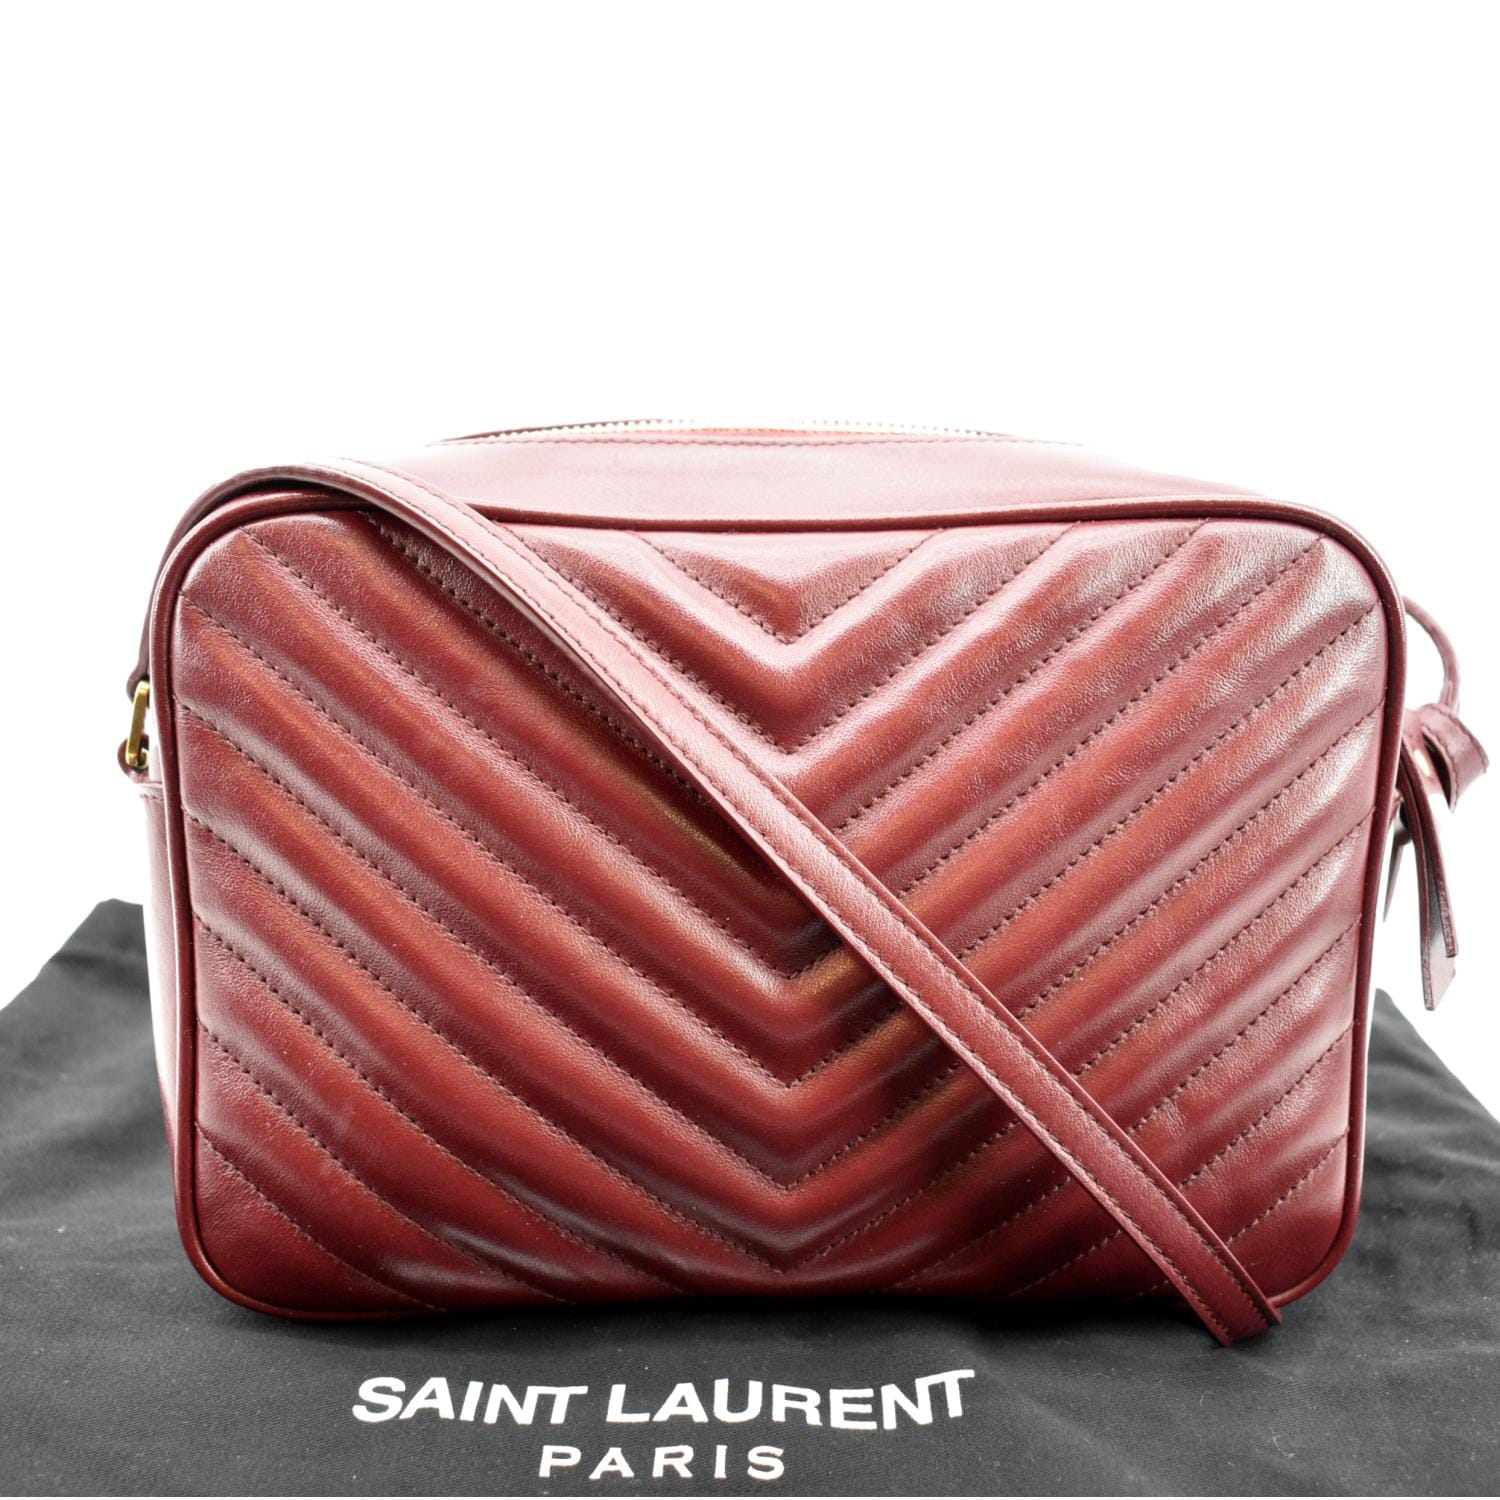 The ever popular YSL Lou Camera Bag now has the perfect back